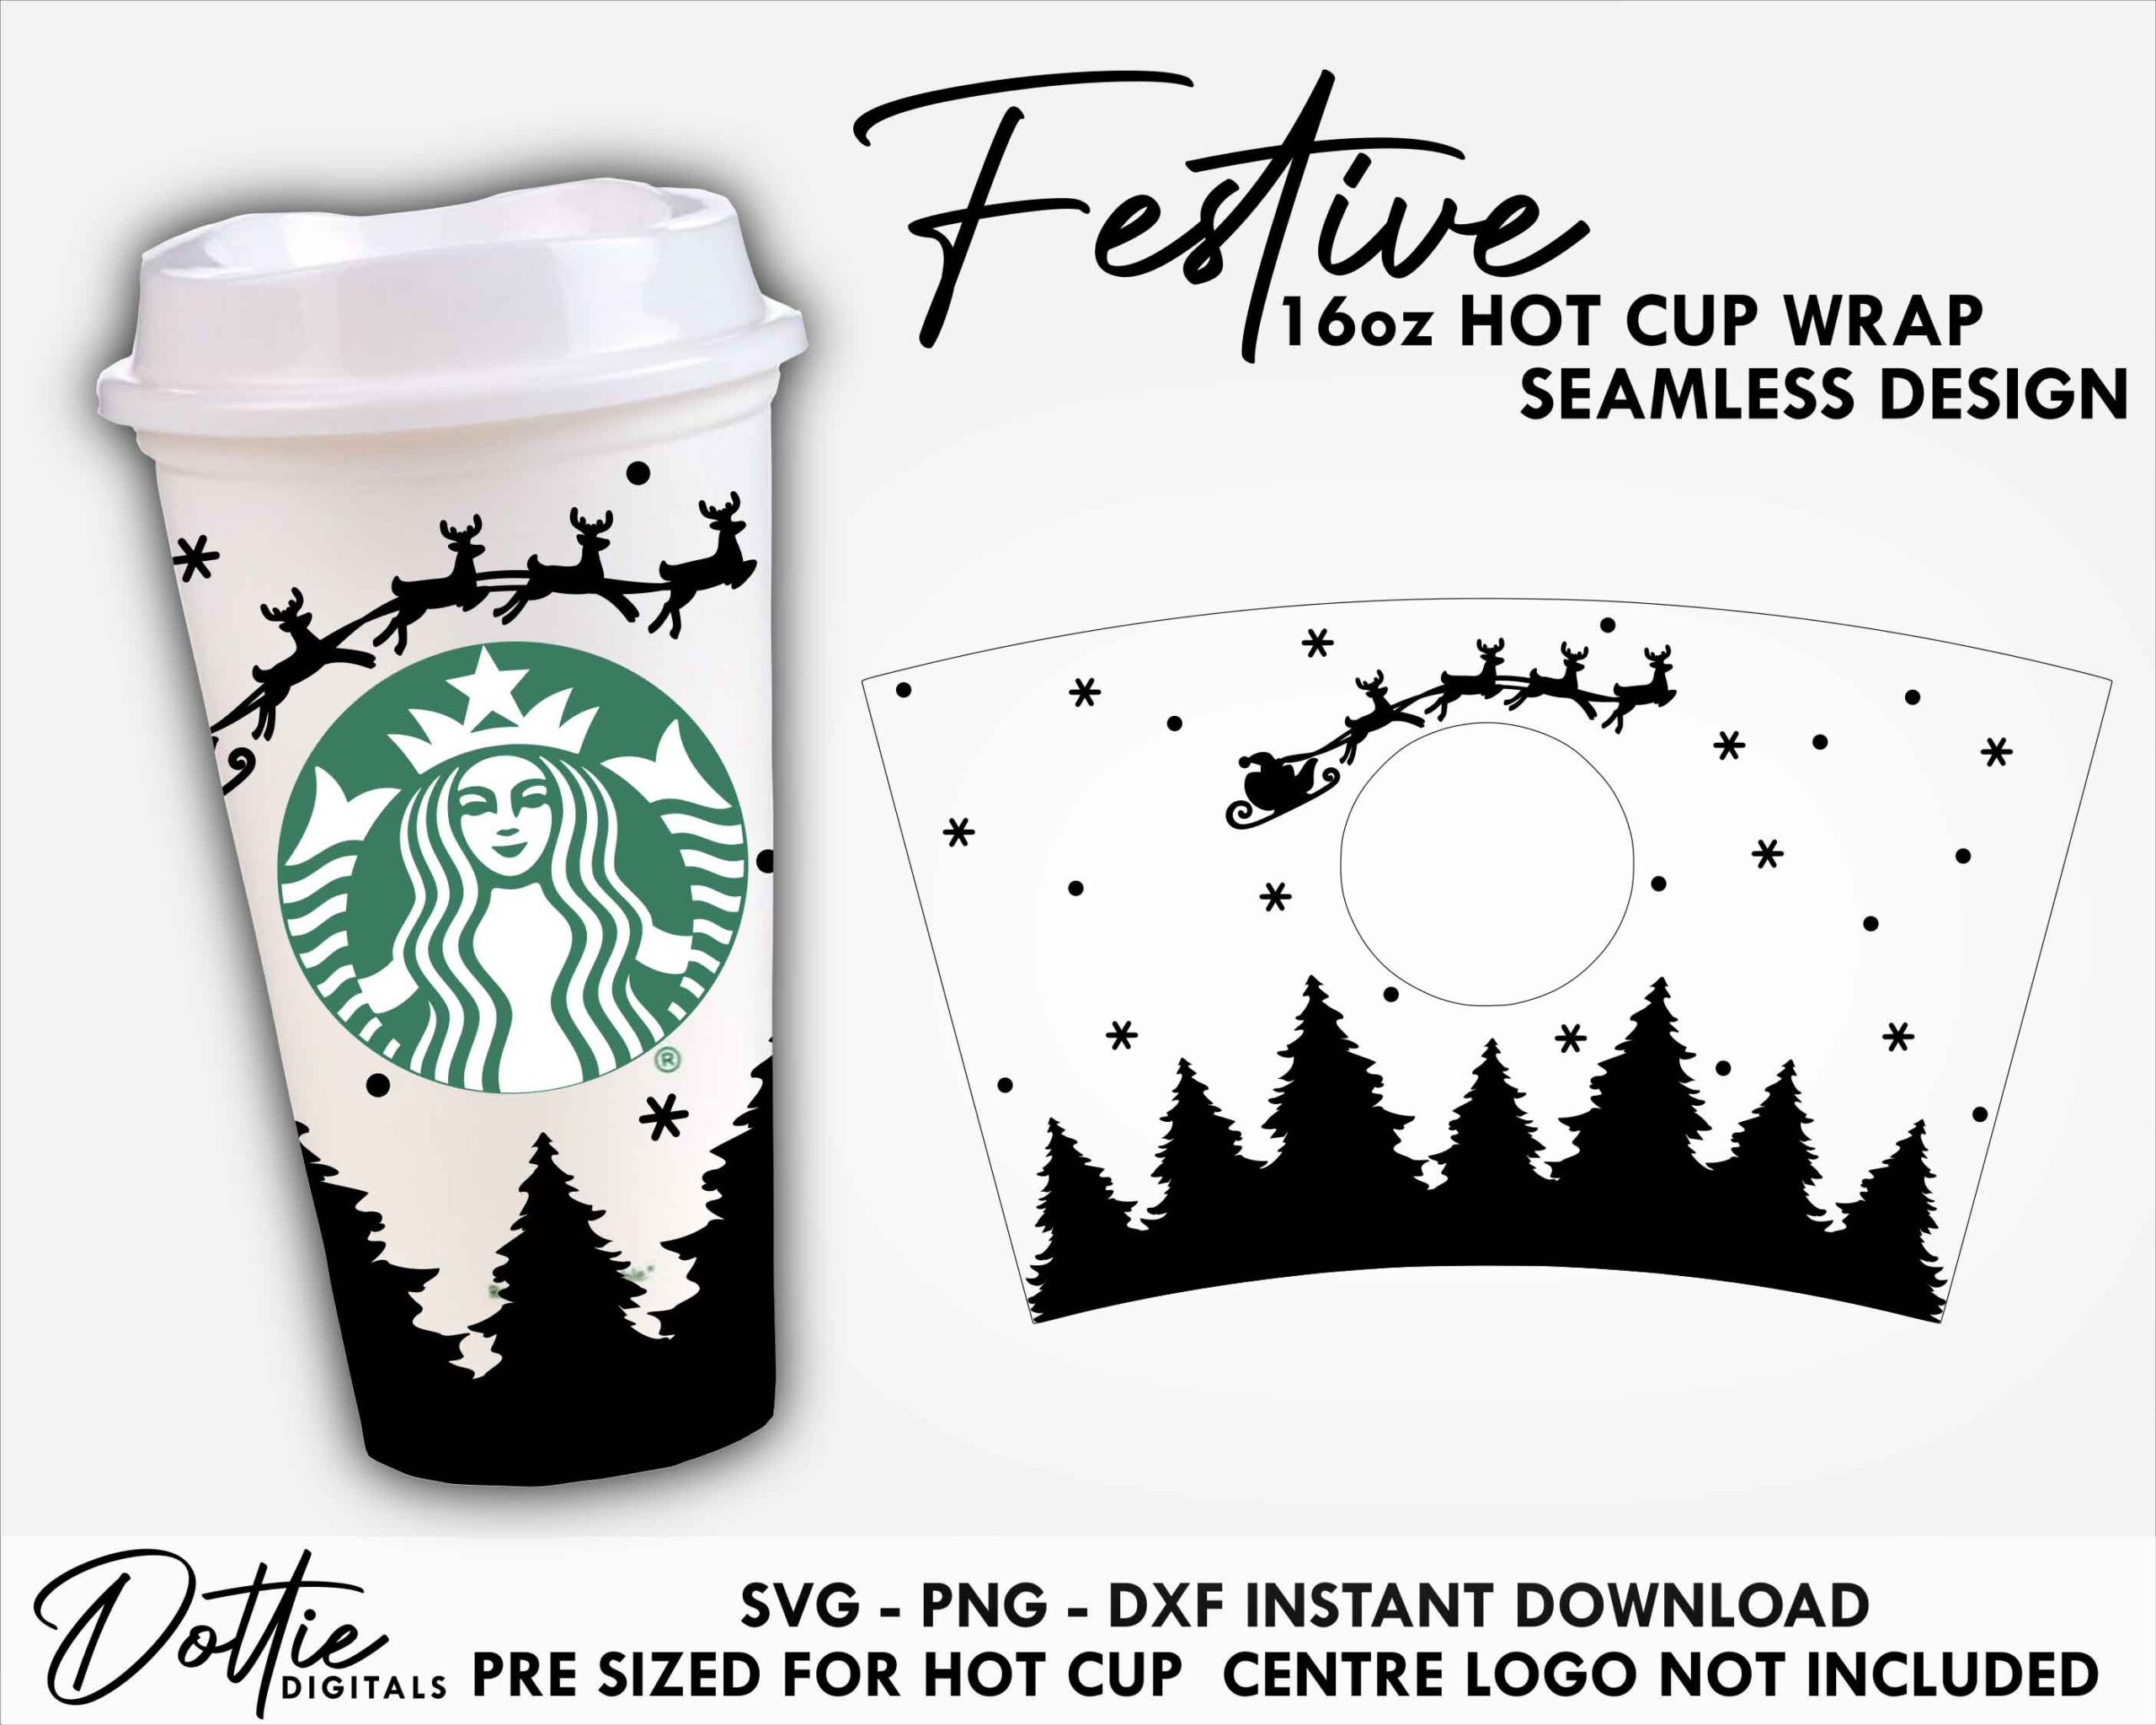 Dottie Digitals - Starbucks Cup SVG Stockings Hot Cup Svg PNG DXF Xmas  Cutting File 16oz Grande Instant Digital Download Holidays Travel Coffee  Cricut